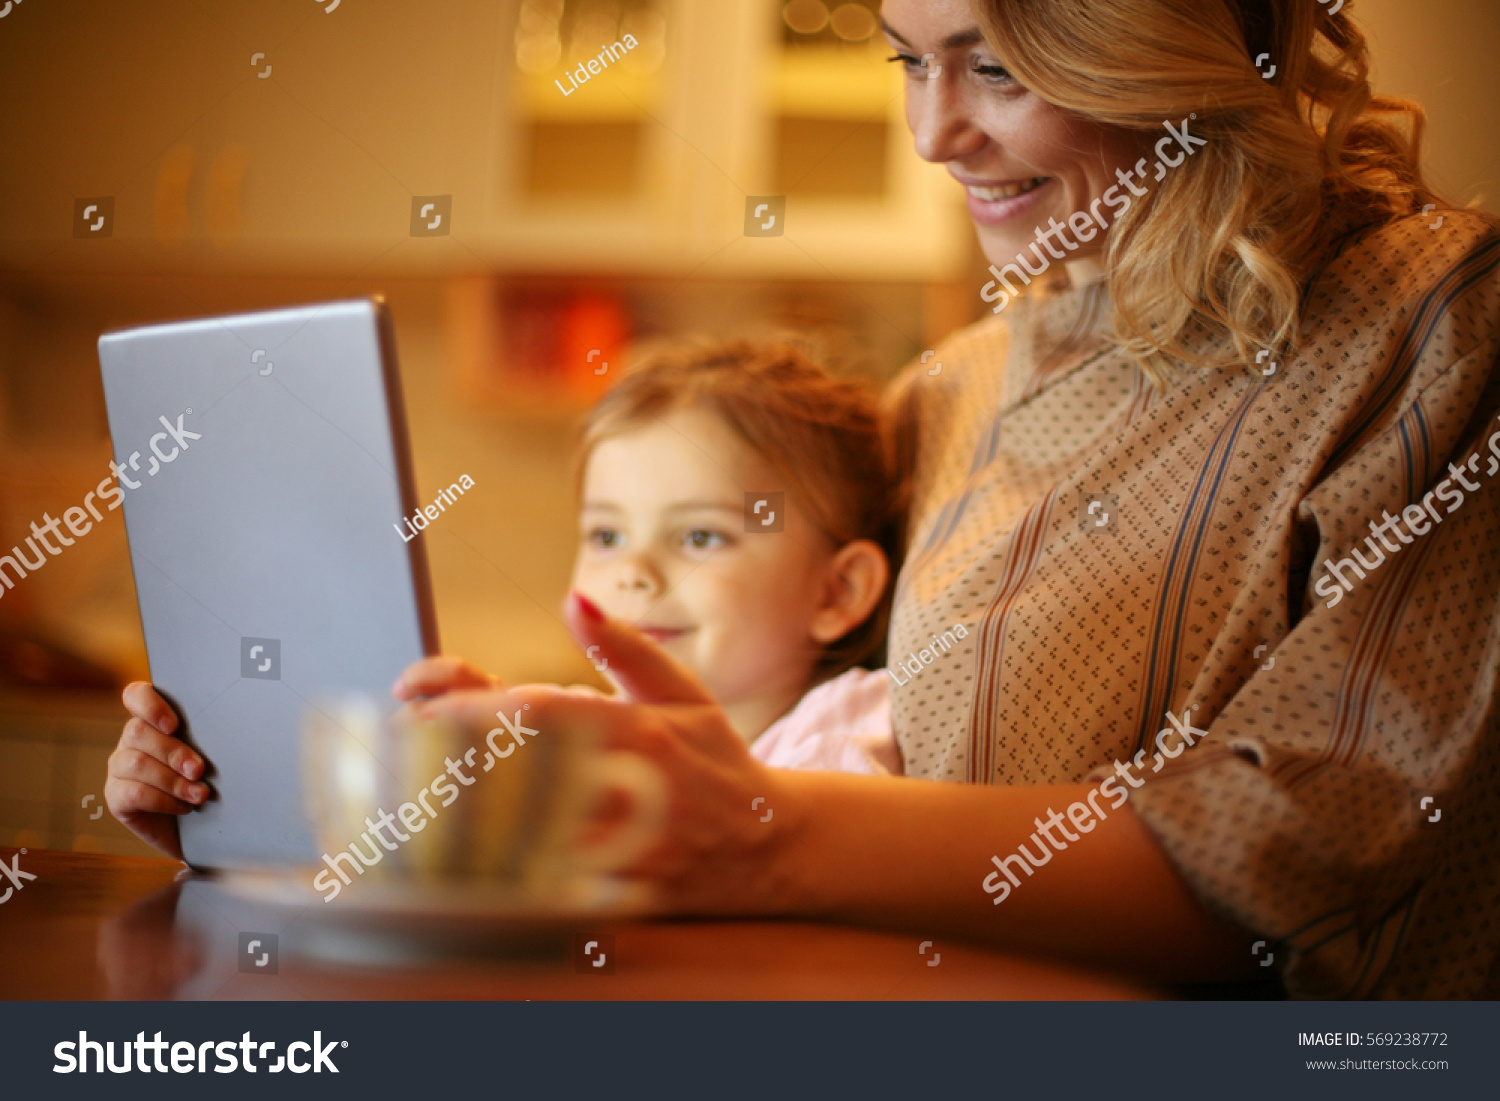 Pretty blonde Caucasian girl reading with her mother from tablet and smiling. Focus on woman. #569238772